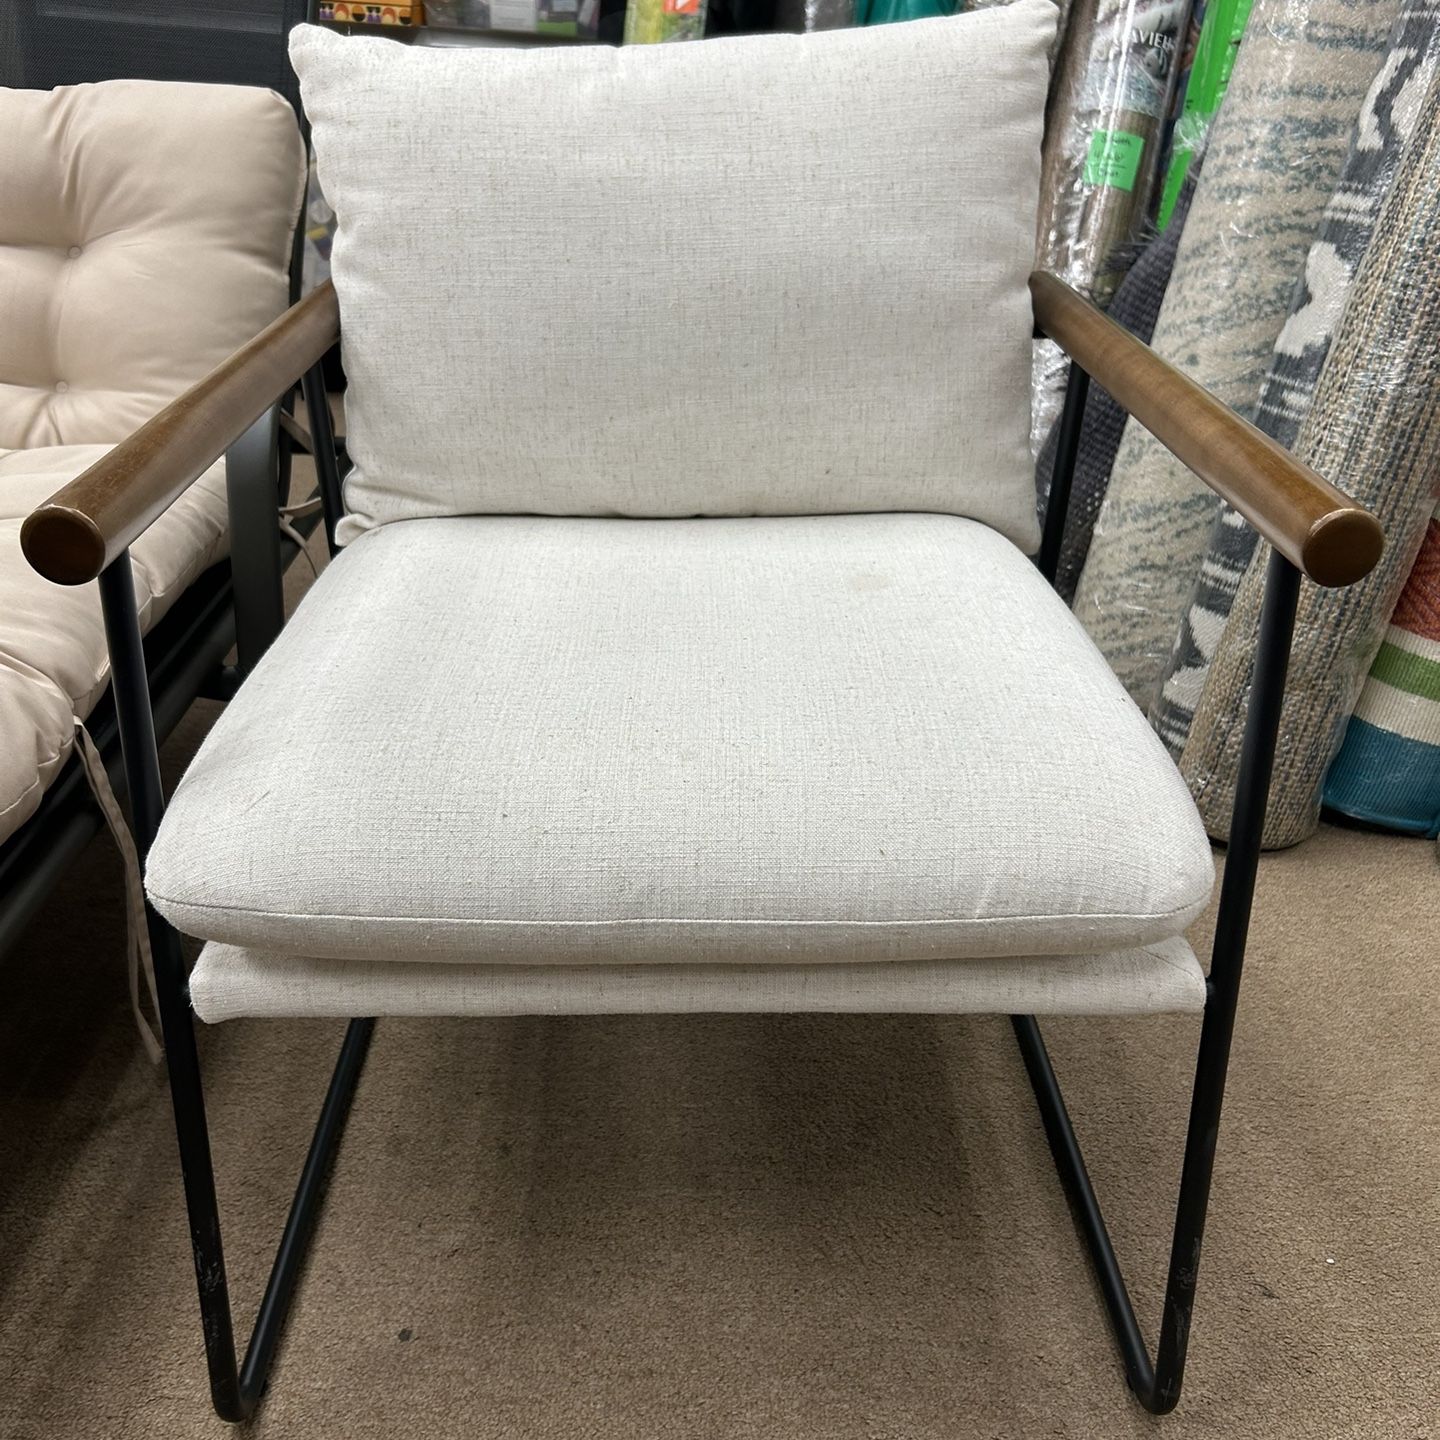 Cushioned Metal & Wood Accent Arm Chair - Cream/Black - Hearth & Hand with Magnolia